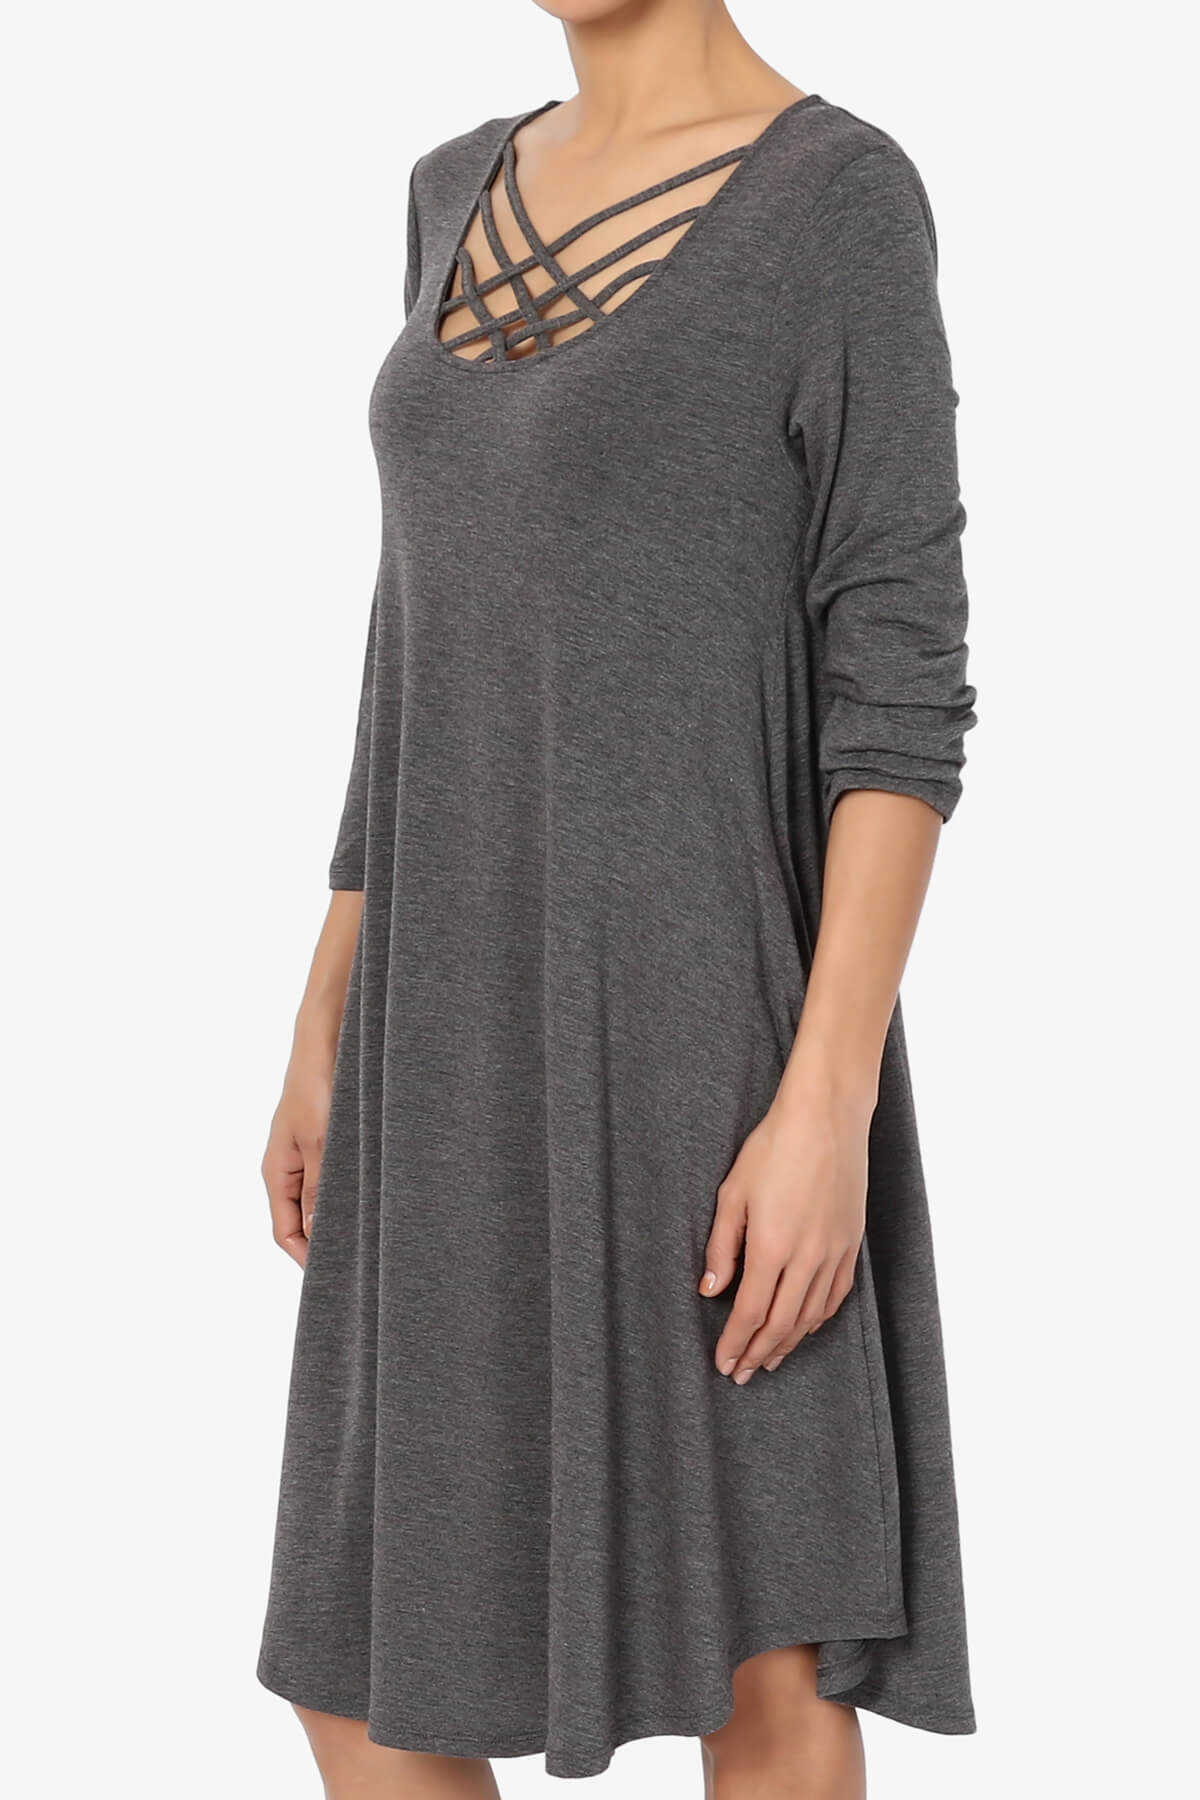 Ariella 3/4 Sleeve Strappy Scoop Neck Dress CHARCOAL_3